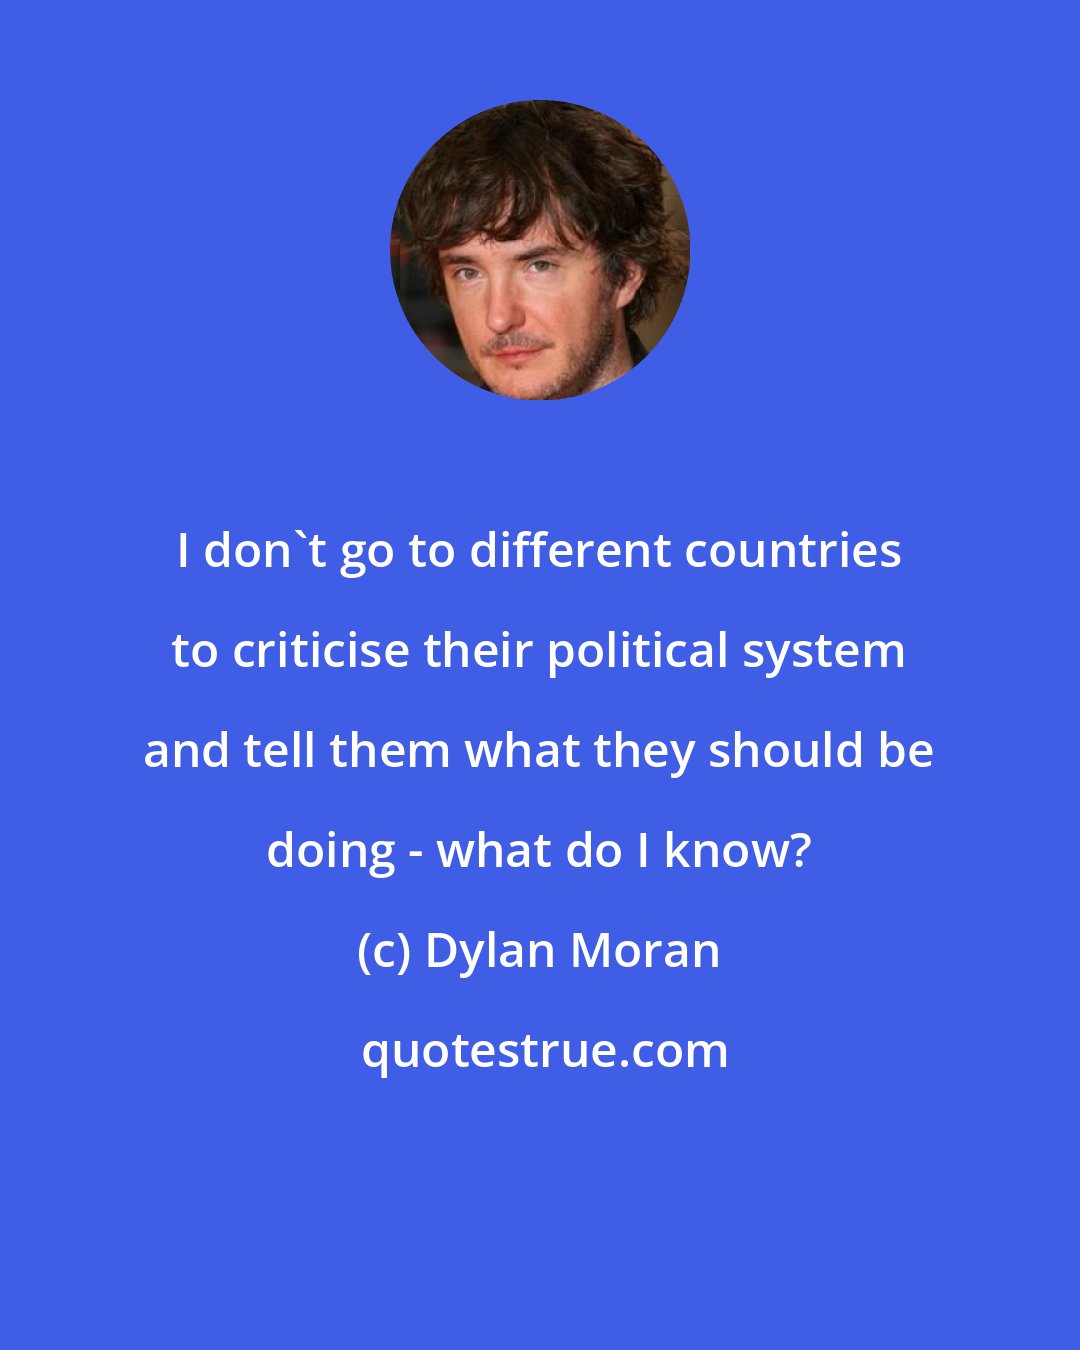 Dylan Moran: I don't go to different countries to criticise their political system and tell them what they should be doing - what do I know?